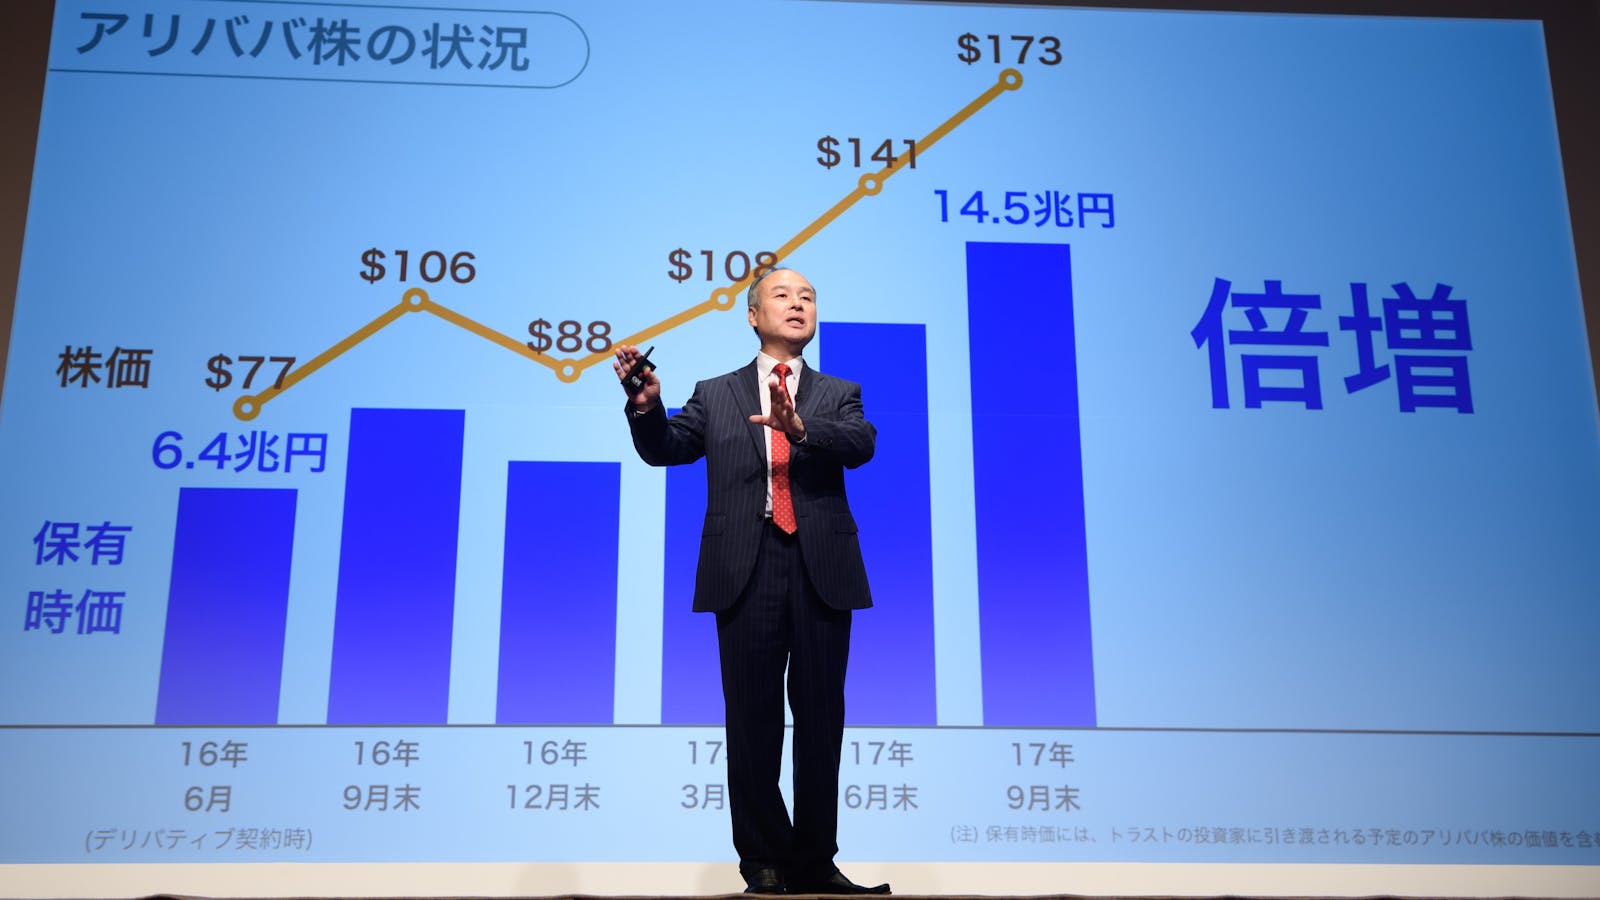 SoftBank CEO Masayoshi Son at a news conference announcing quarterly earnings late last year. Photo by Bloomberg.